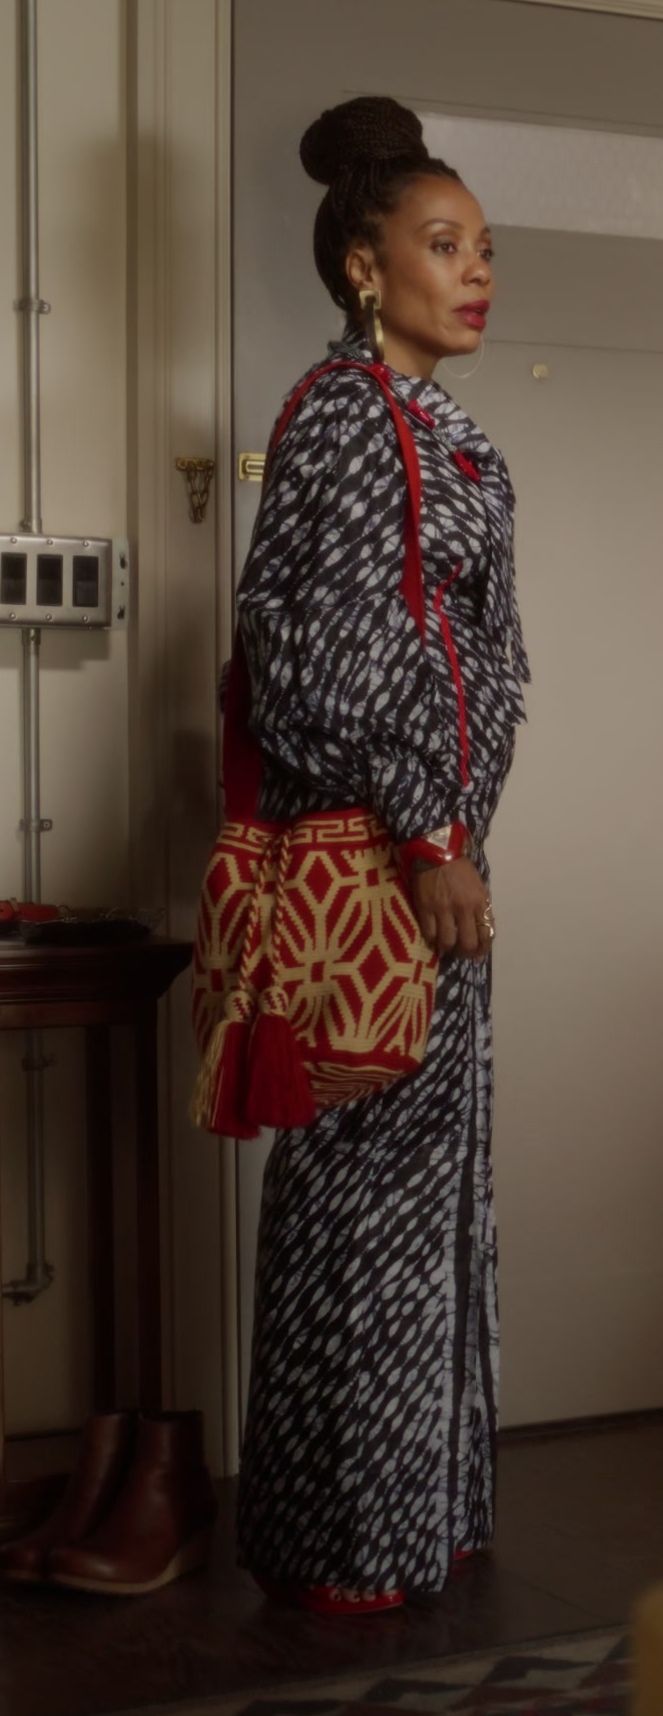 Worn on And Just Like That... TV Show - Mochila Bag of Karen Pittman as Dr. Nya Wallace